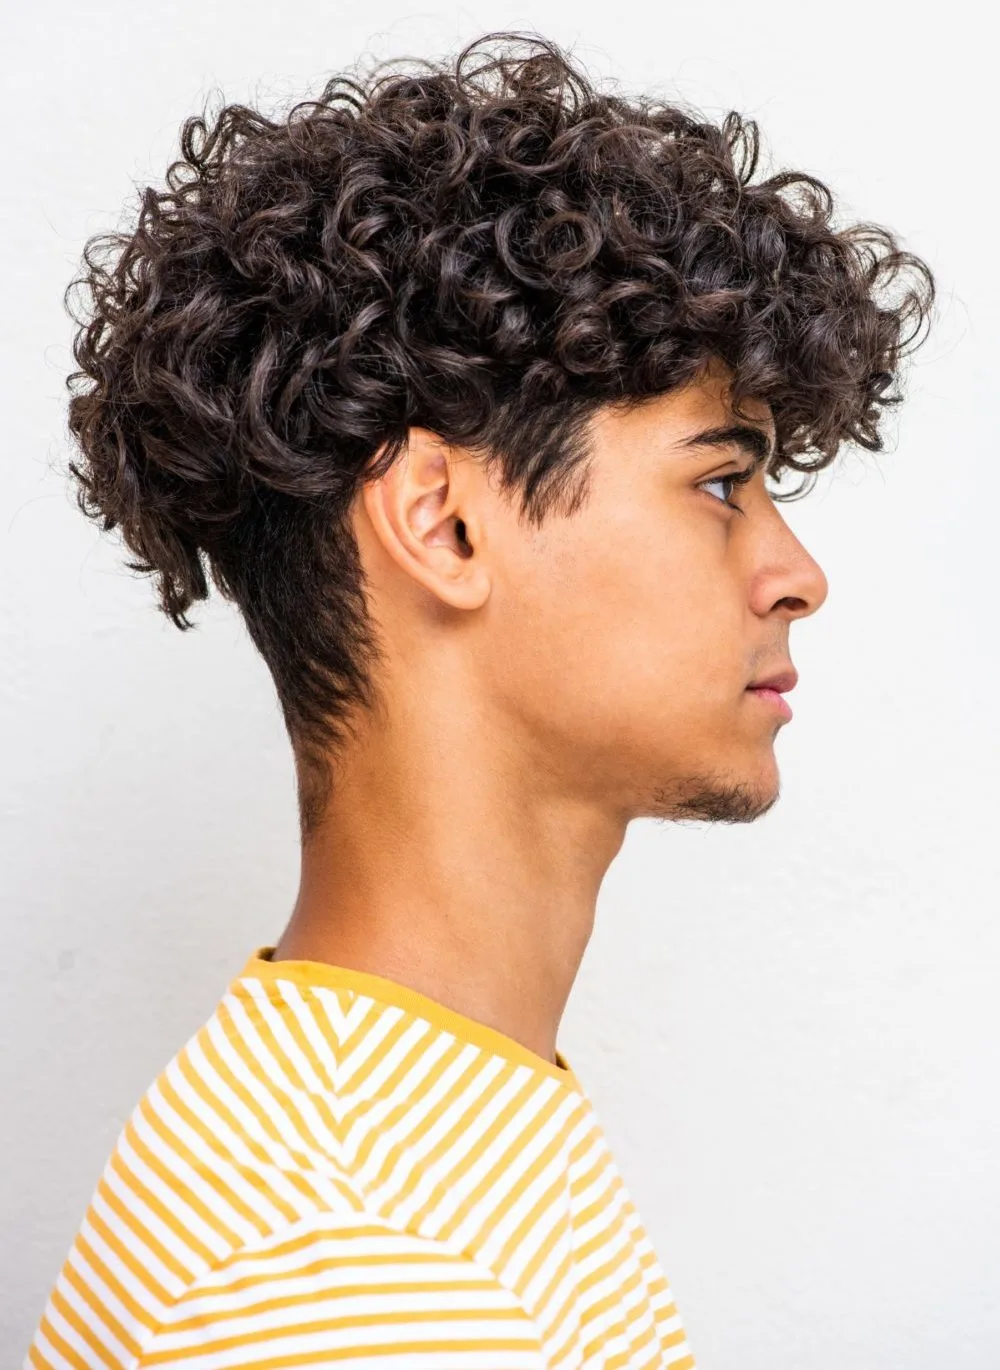 12 Black Guys With Perms That Inspire in 2023